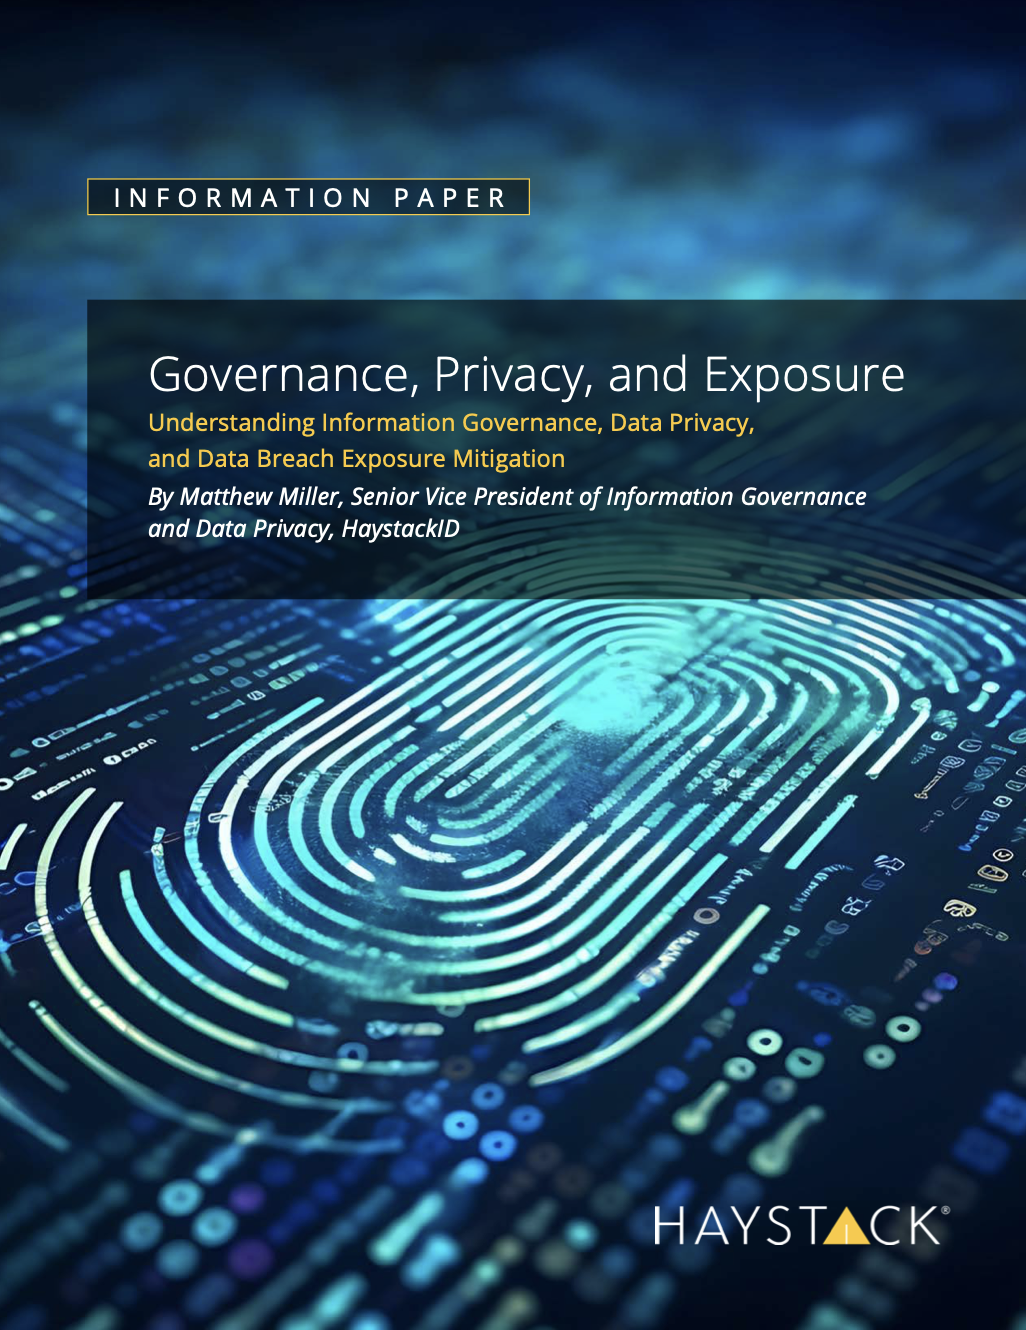 PDF Cover Image: Understanding Information Governance, Data Privacy, and Data Breach Exposure Mitigation